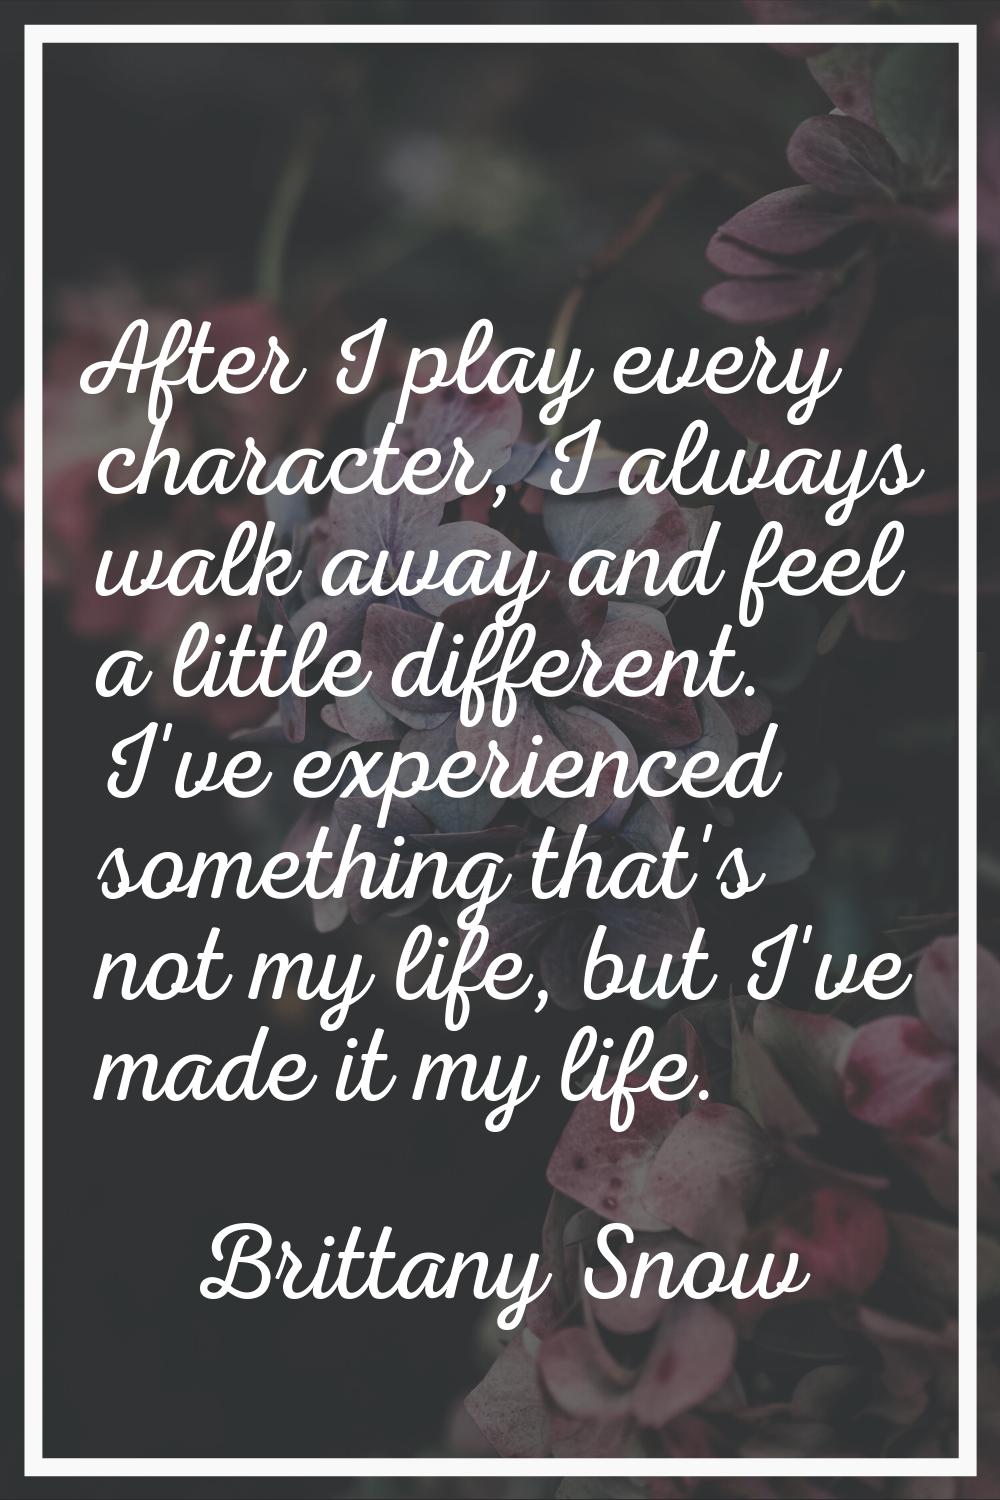 After I play every character, I always walk away and feel a little different. I've experienced some